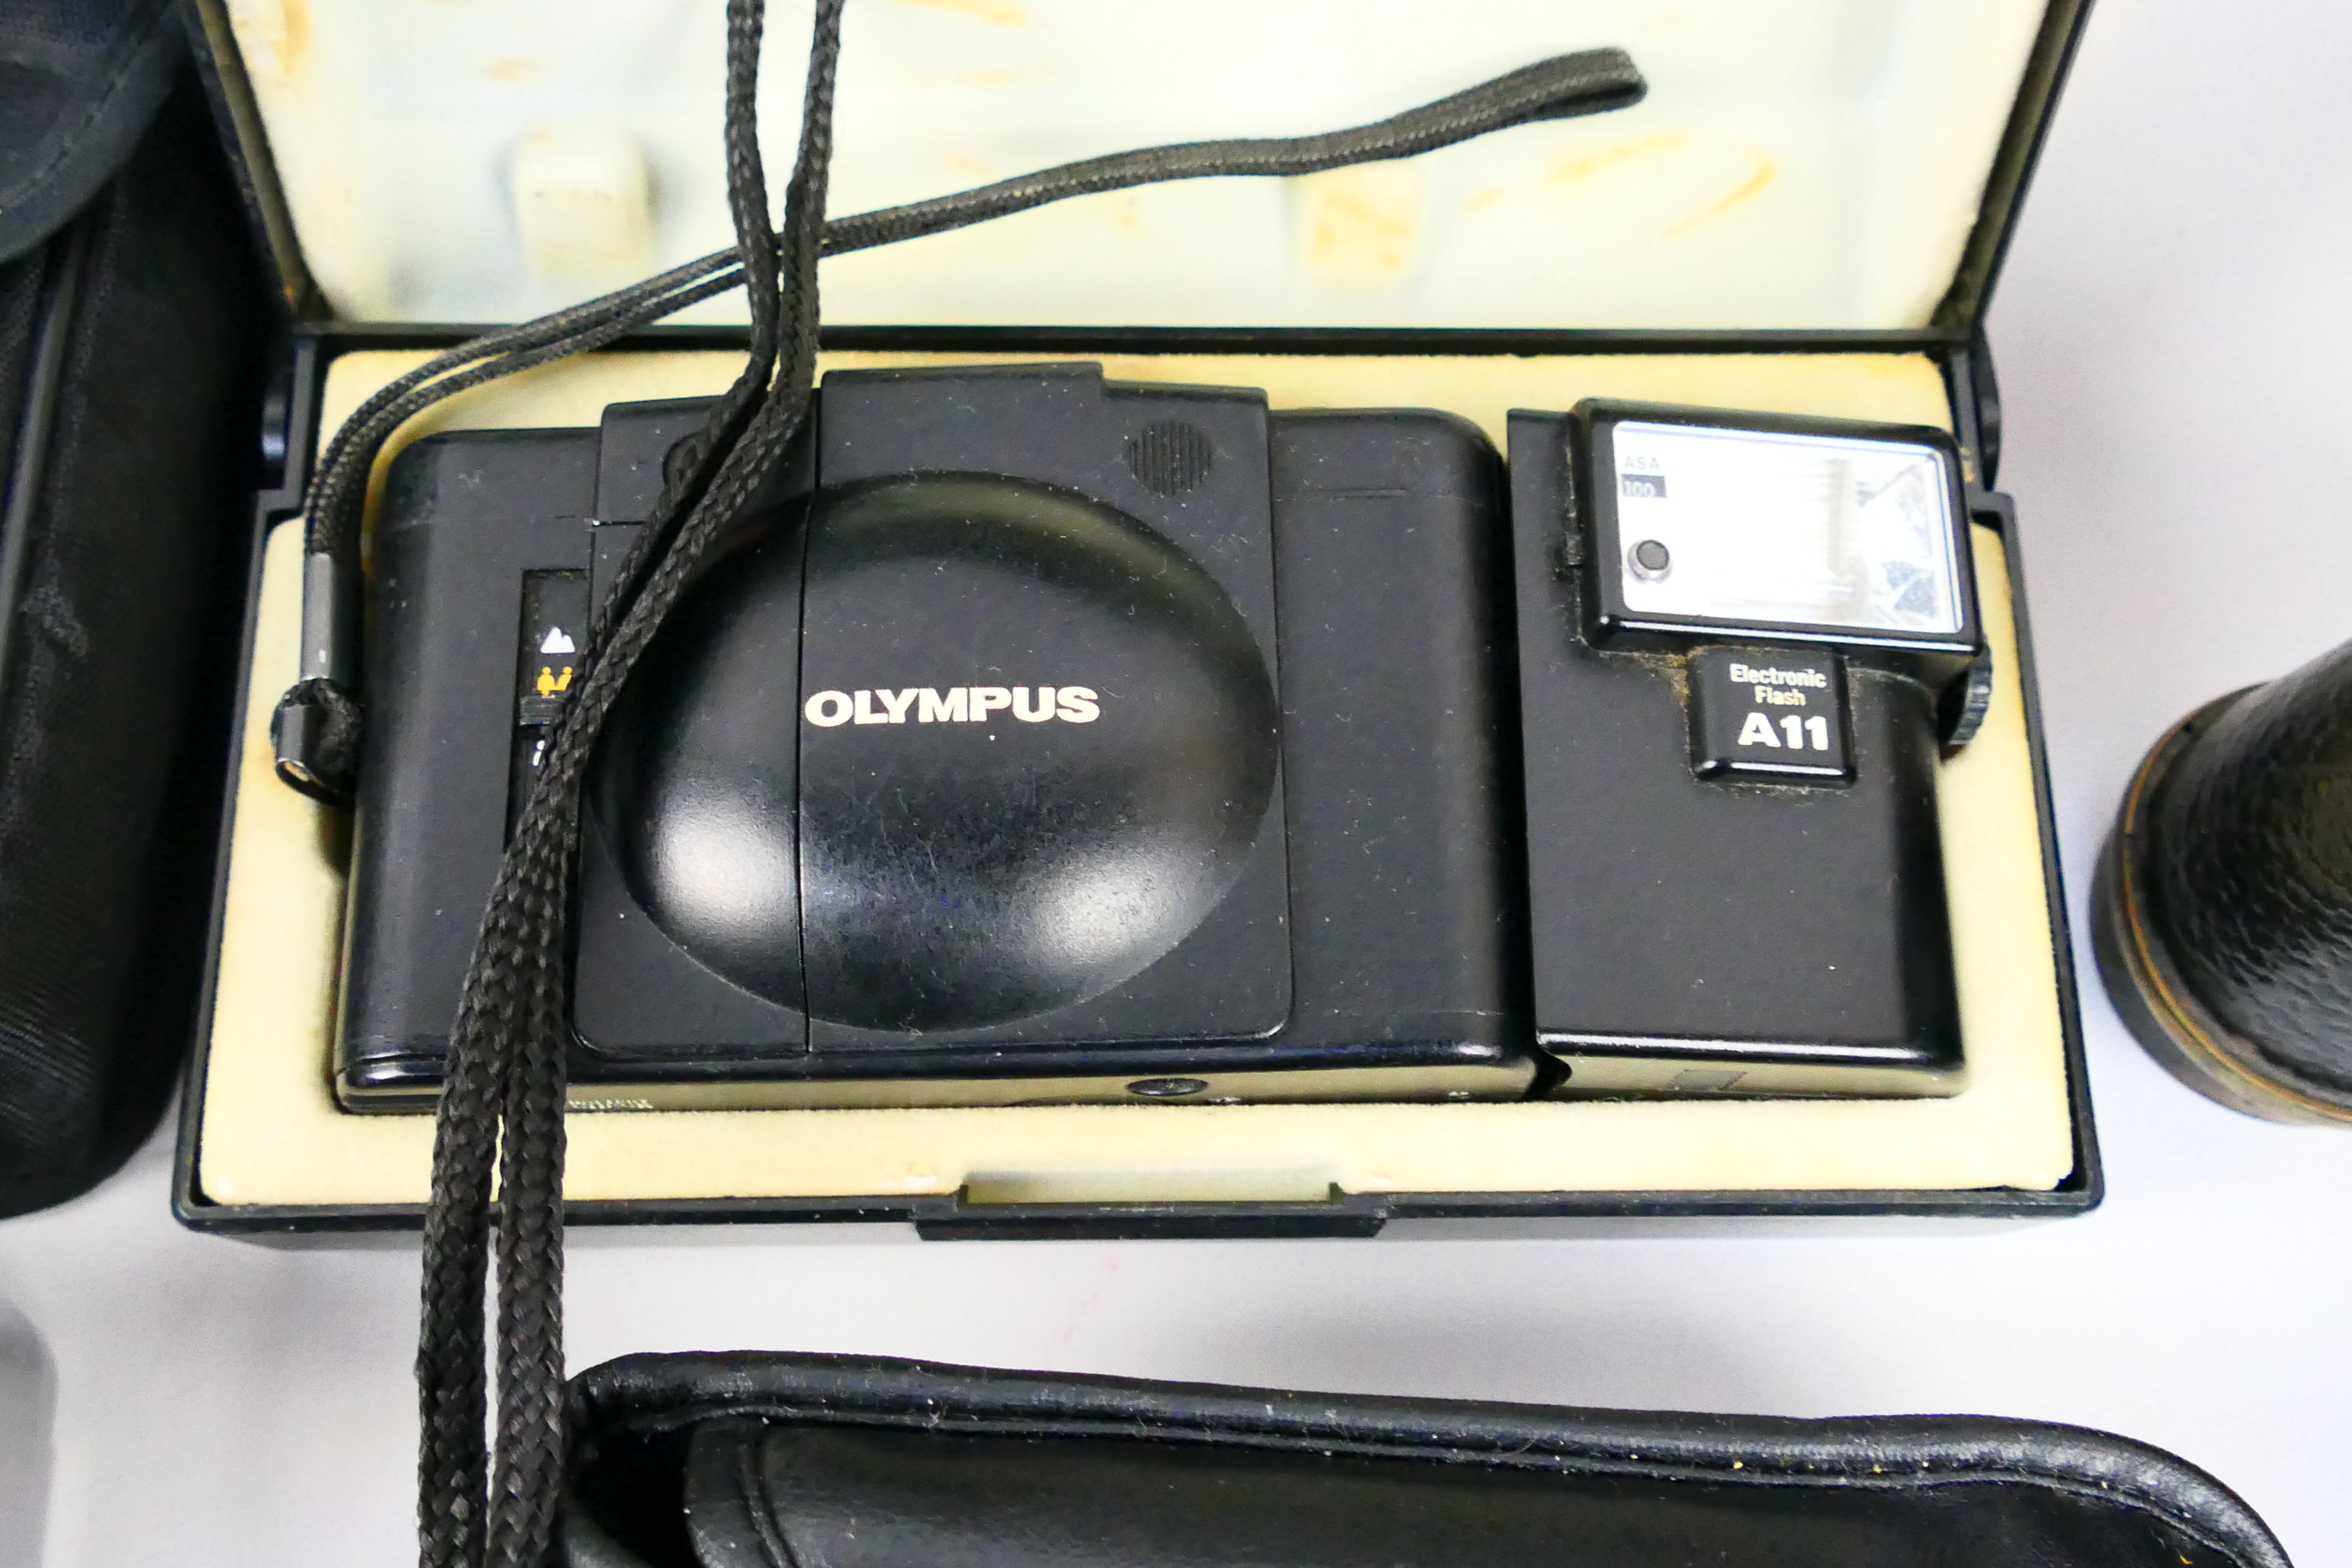 Photography - A small collection of cameras to include an Olympus XA2 with an A11 Flash contained - Image 4 of 7